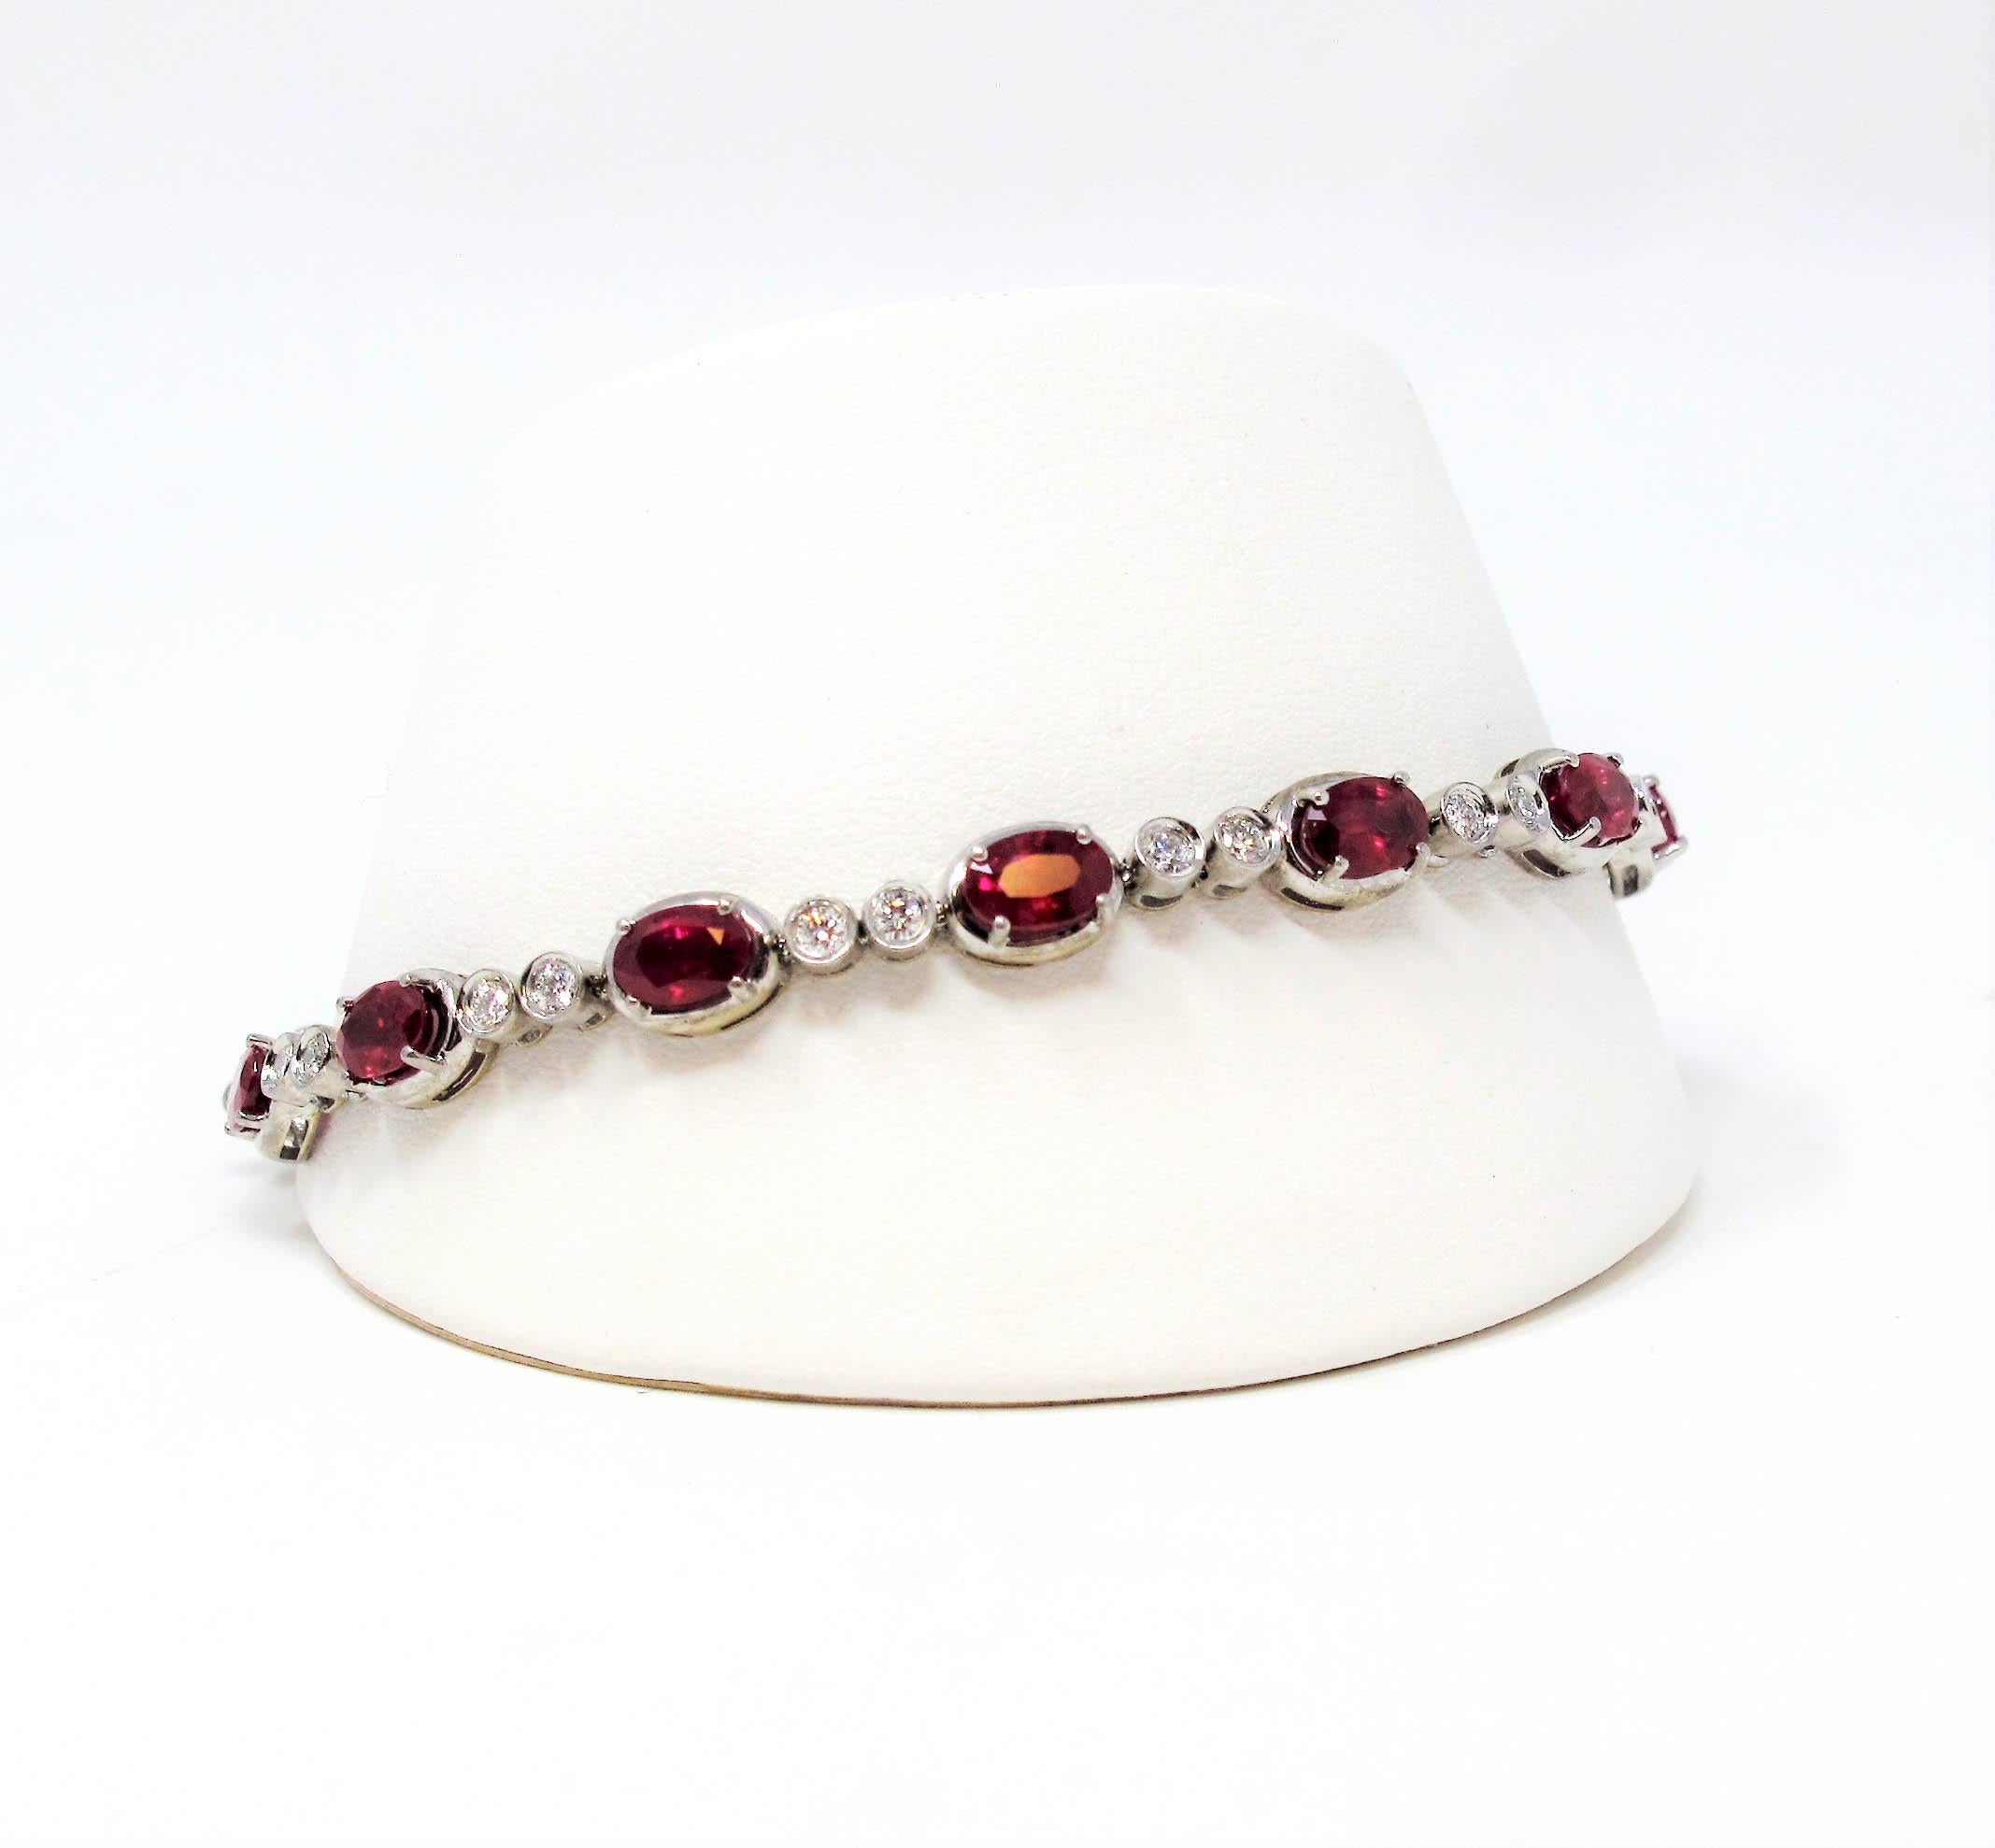 Breathtaking tennis bracelet with a vibrant pop of color. This gorgeous piece absolutely dazzles with its rich red rubies and bright white diamonds. The sleek, strip style design paired with the alternating pattern gives both interest and beauty to